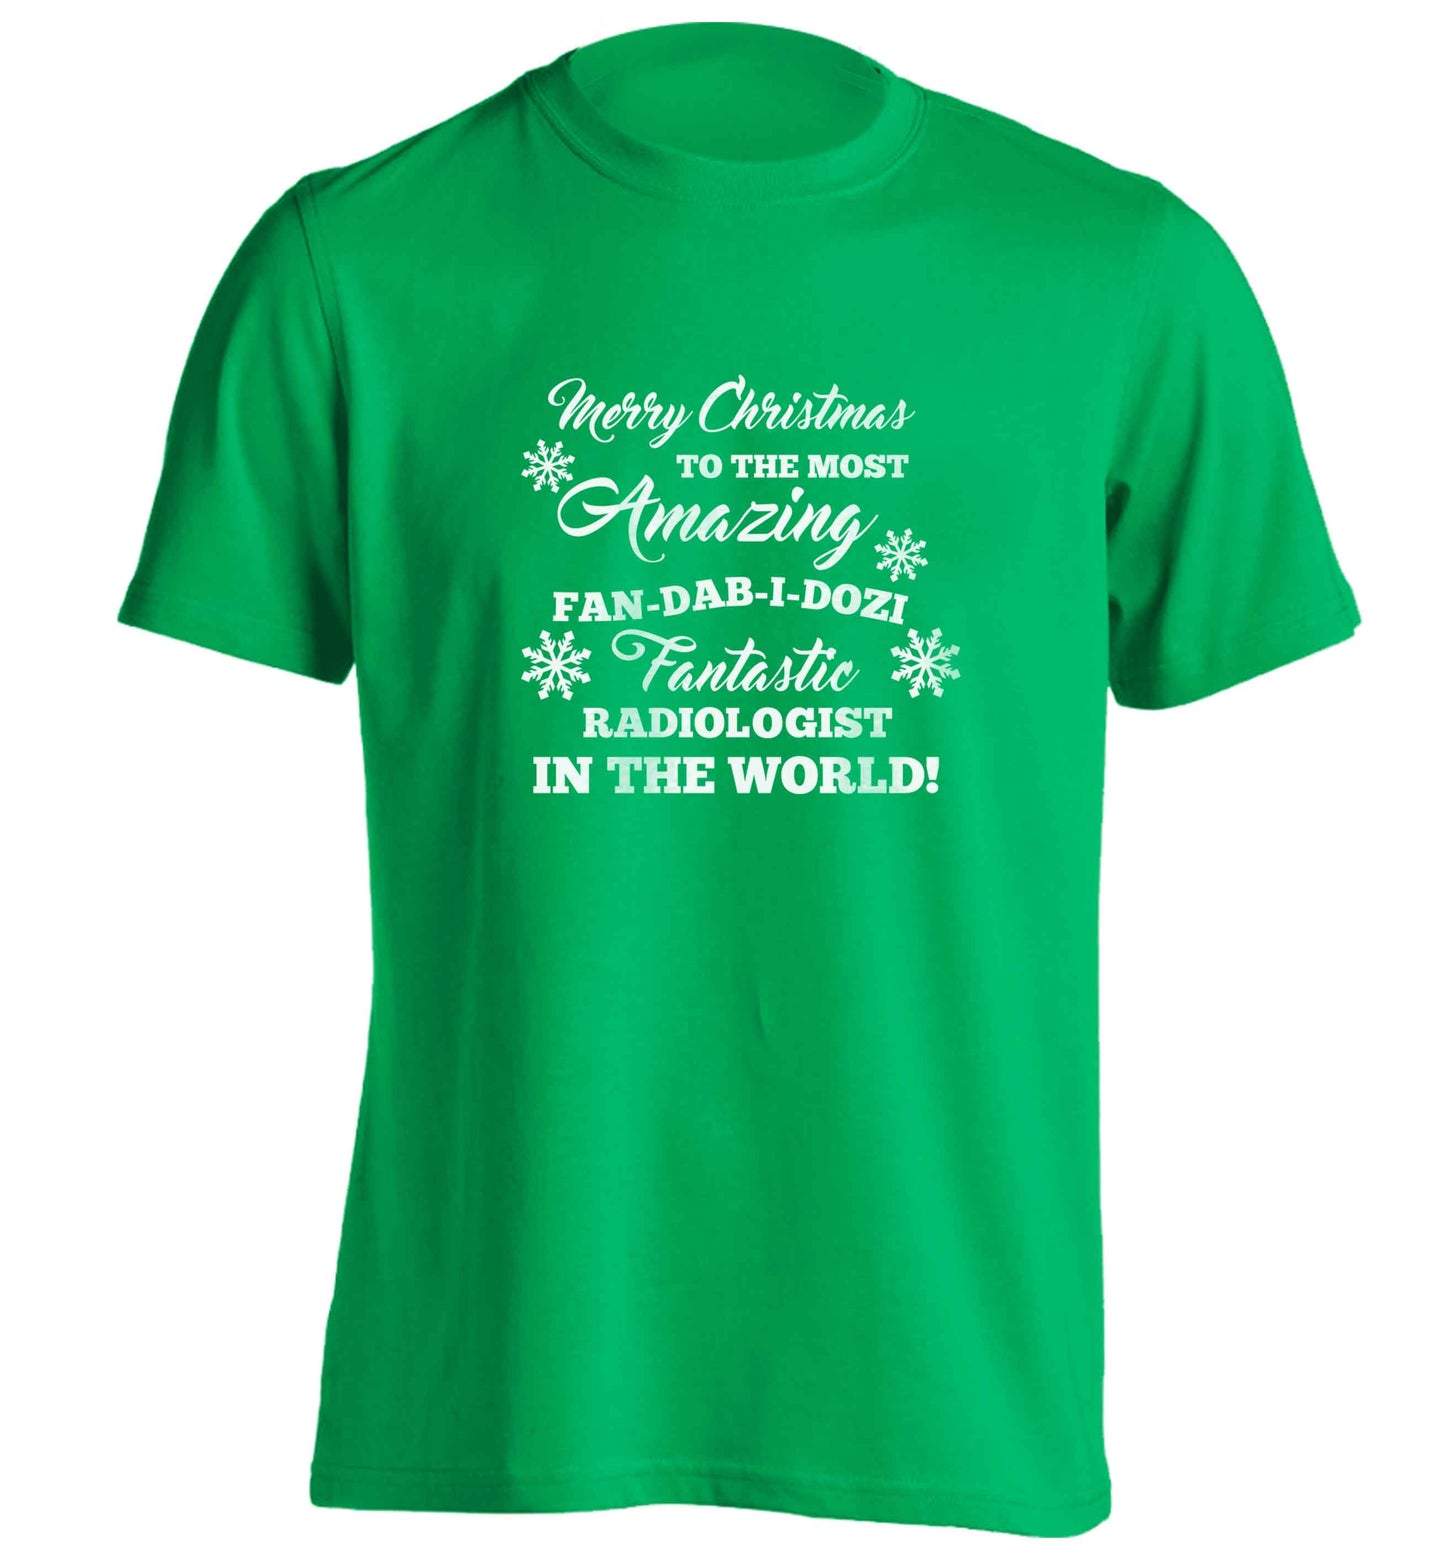 Merry Christmas to the most amazing radiologist in the world! adults unisex green Tshirt 2XL